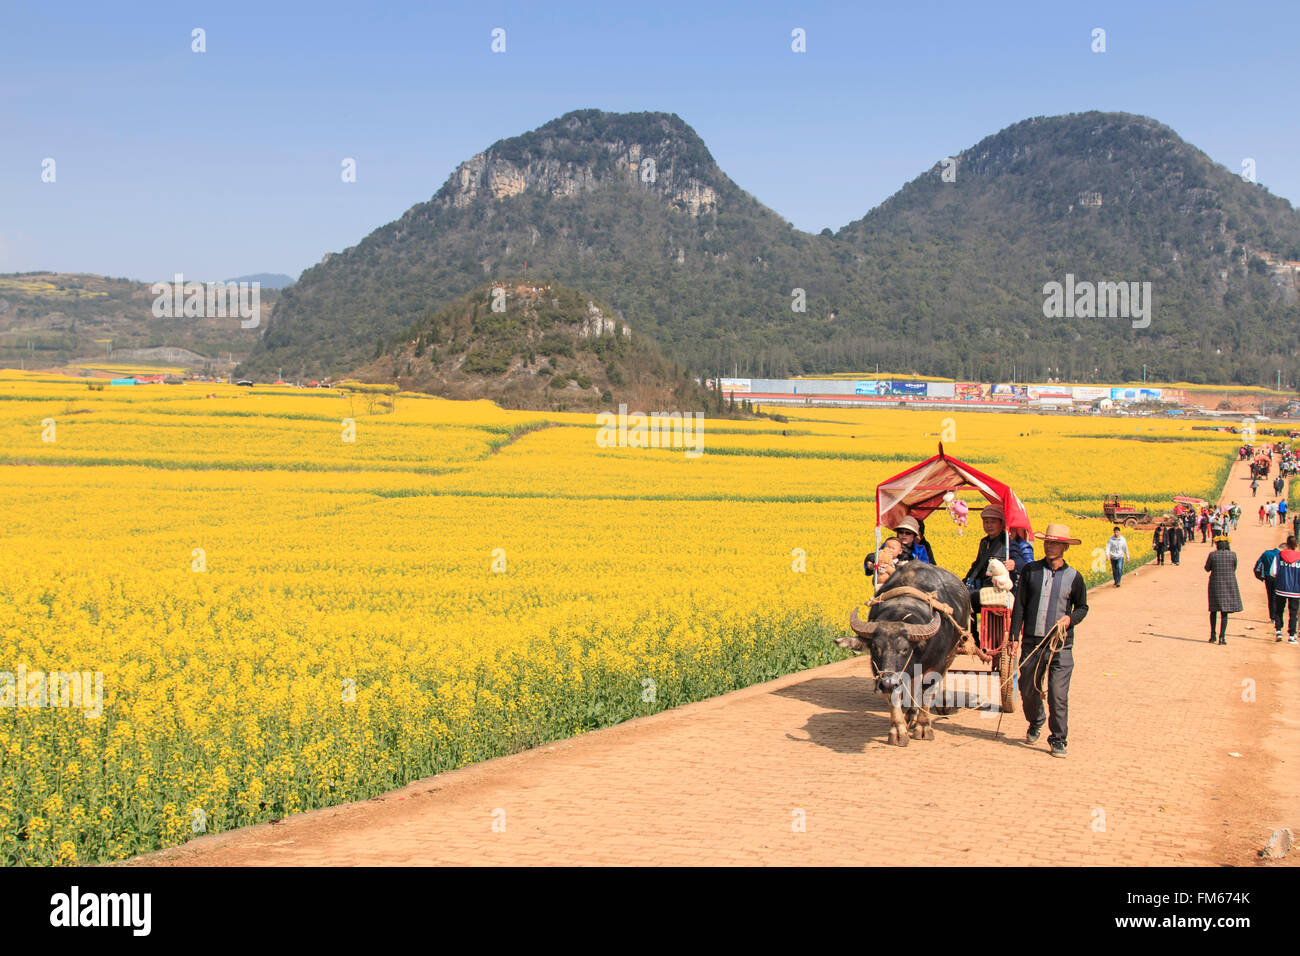 Luoping, China - February 28, 2016: Man riding a waterbuffalo for the tourists among the rapeseed flowers fields of Luoping in Y Stock Photo